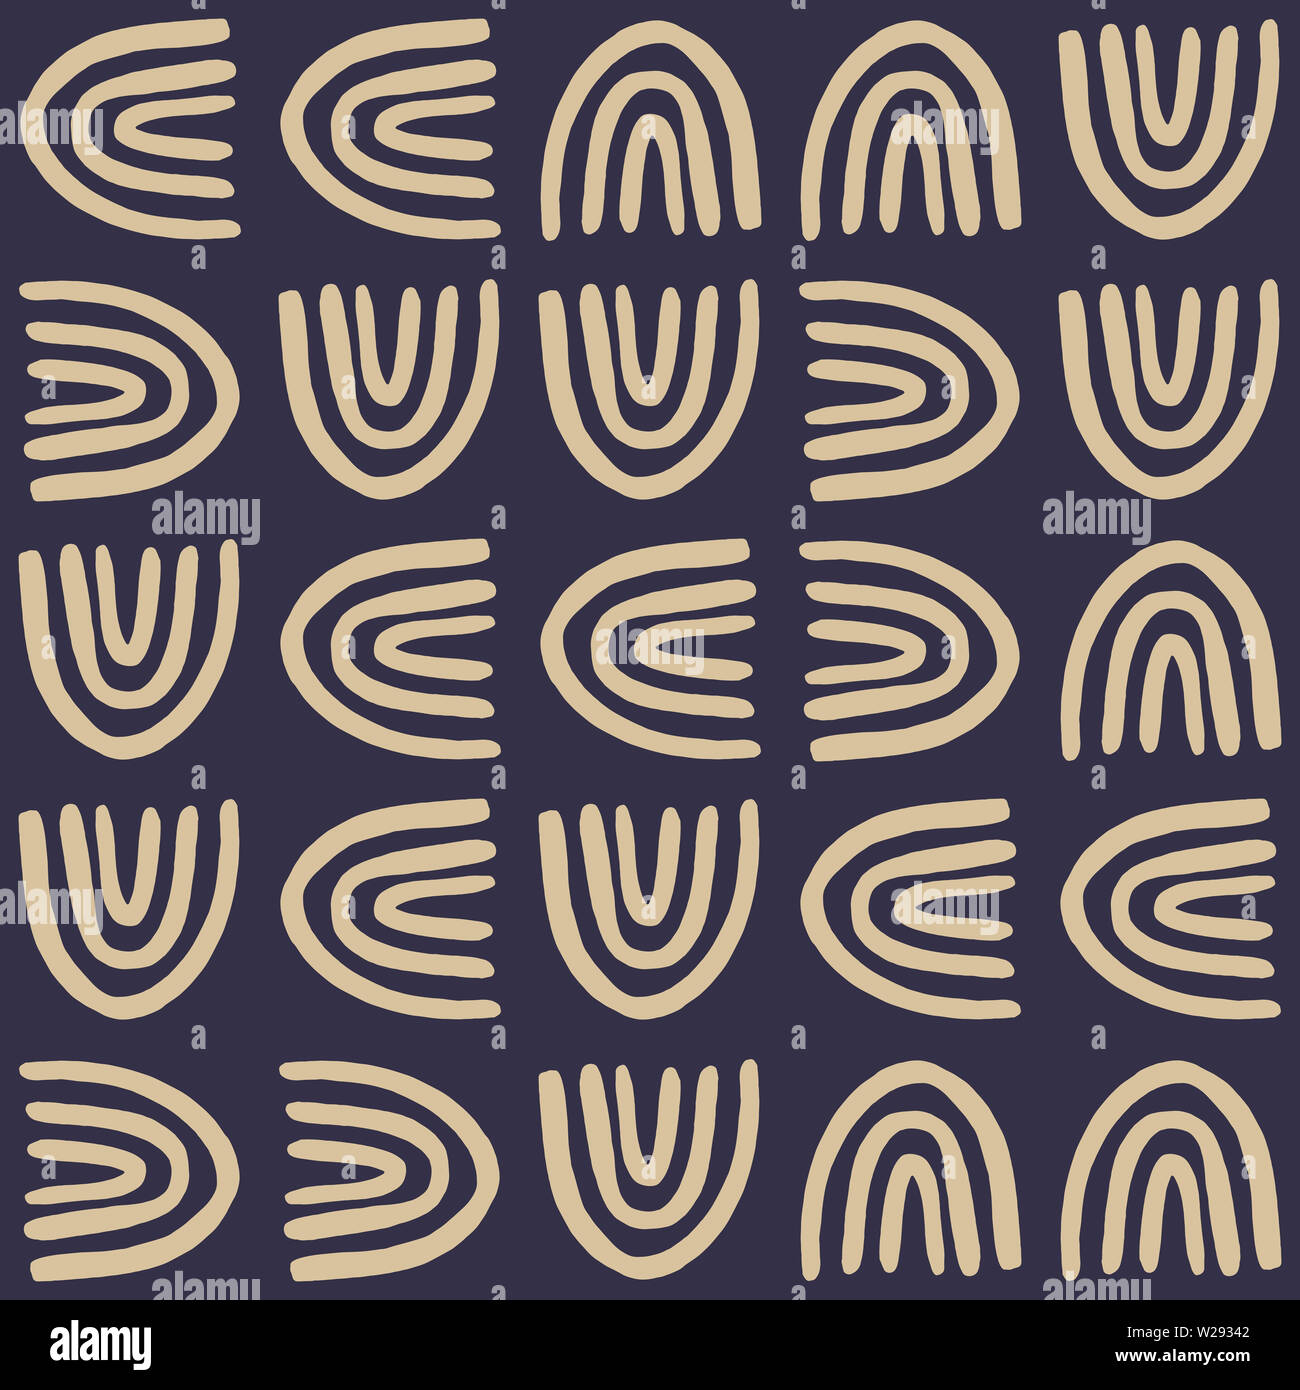 A bold & modern pattern of abstract shapes. Also comes in other colors. Stock Photo